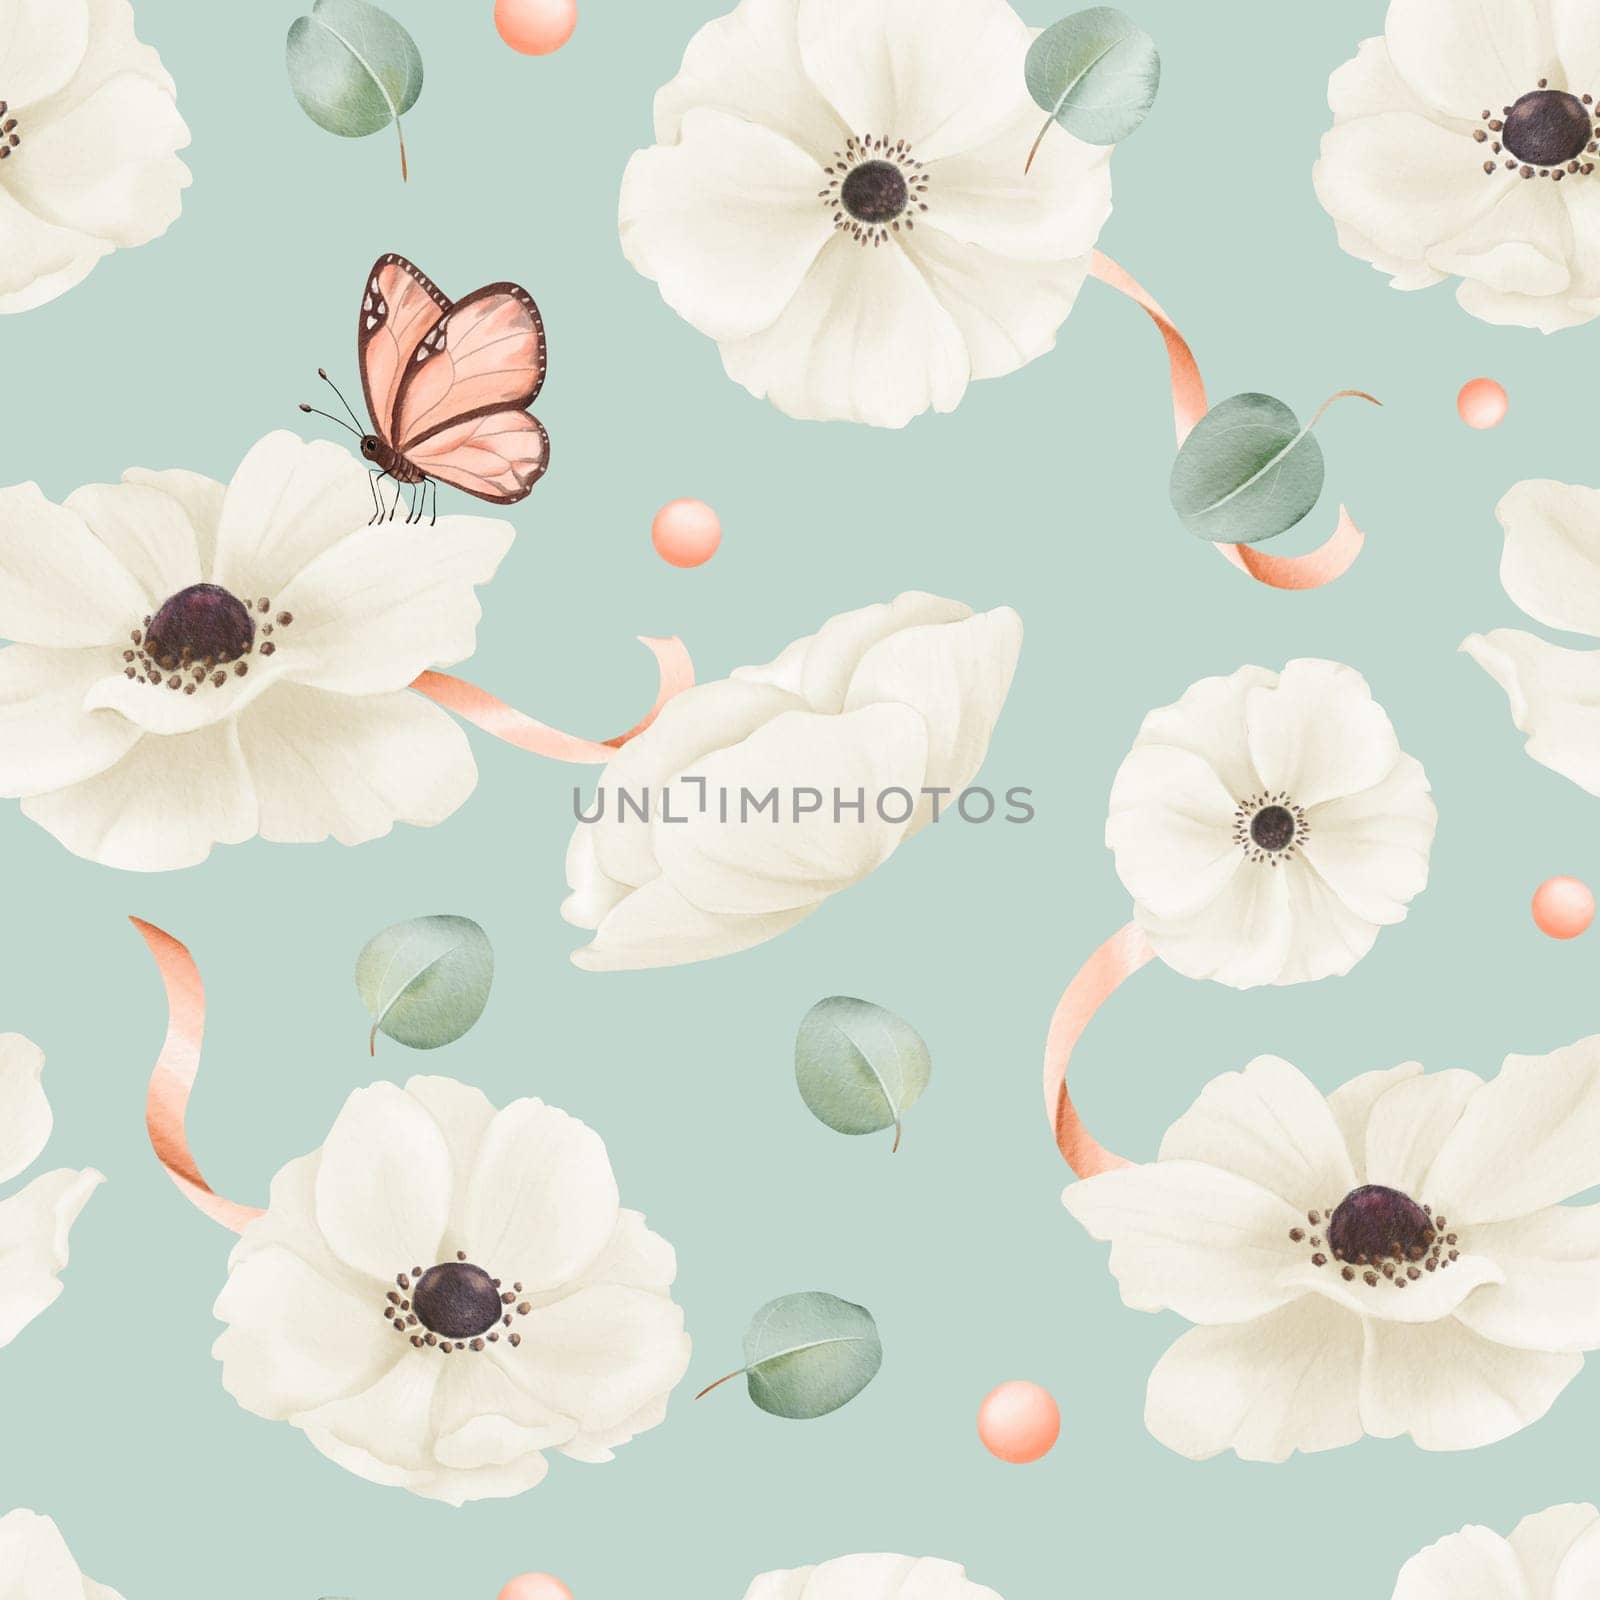 Seamless pattern featuring white watercolor anemones, eucalyptus leaves, satin ribbons, and rhinestones. textile, web design, print materials greeting cards wallpapers gift packaging accessories by Art_Mari_Ka